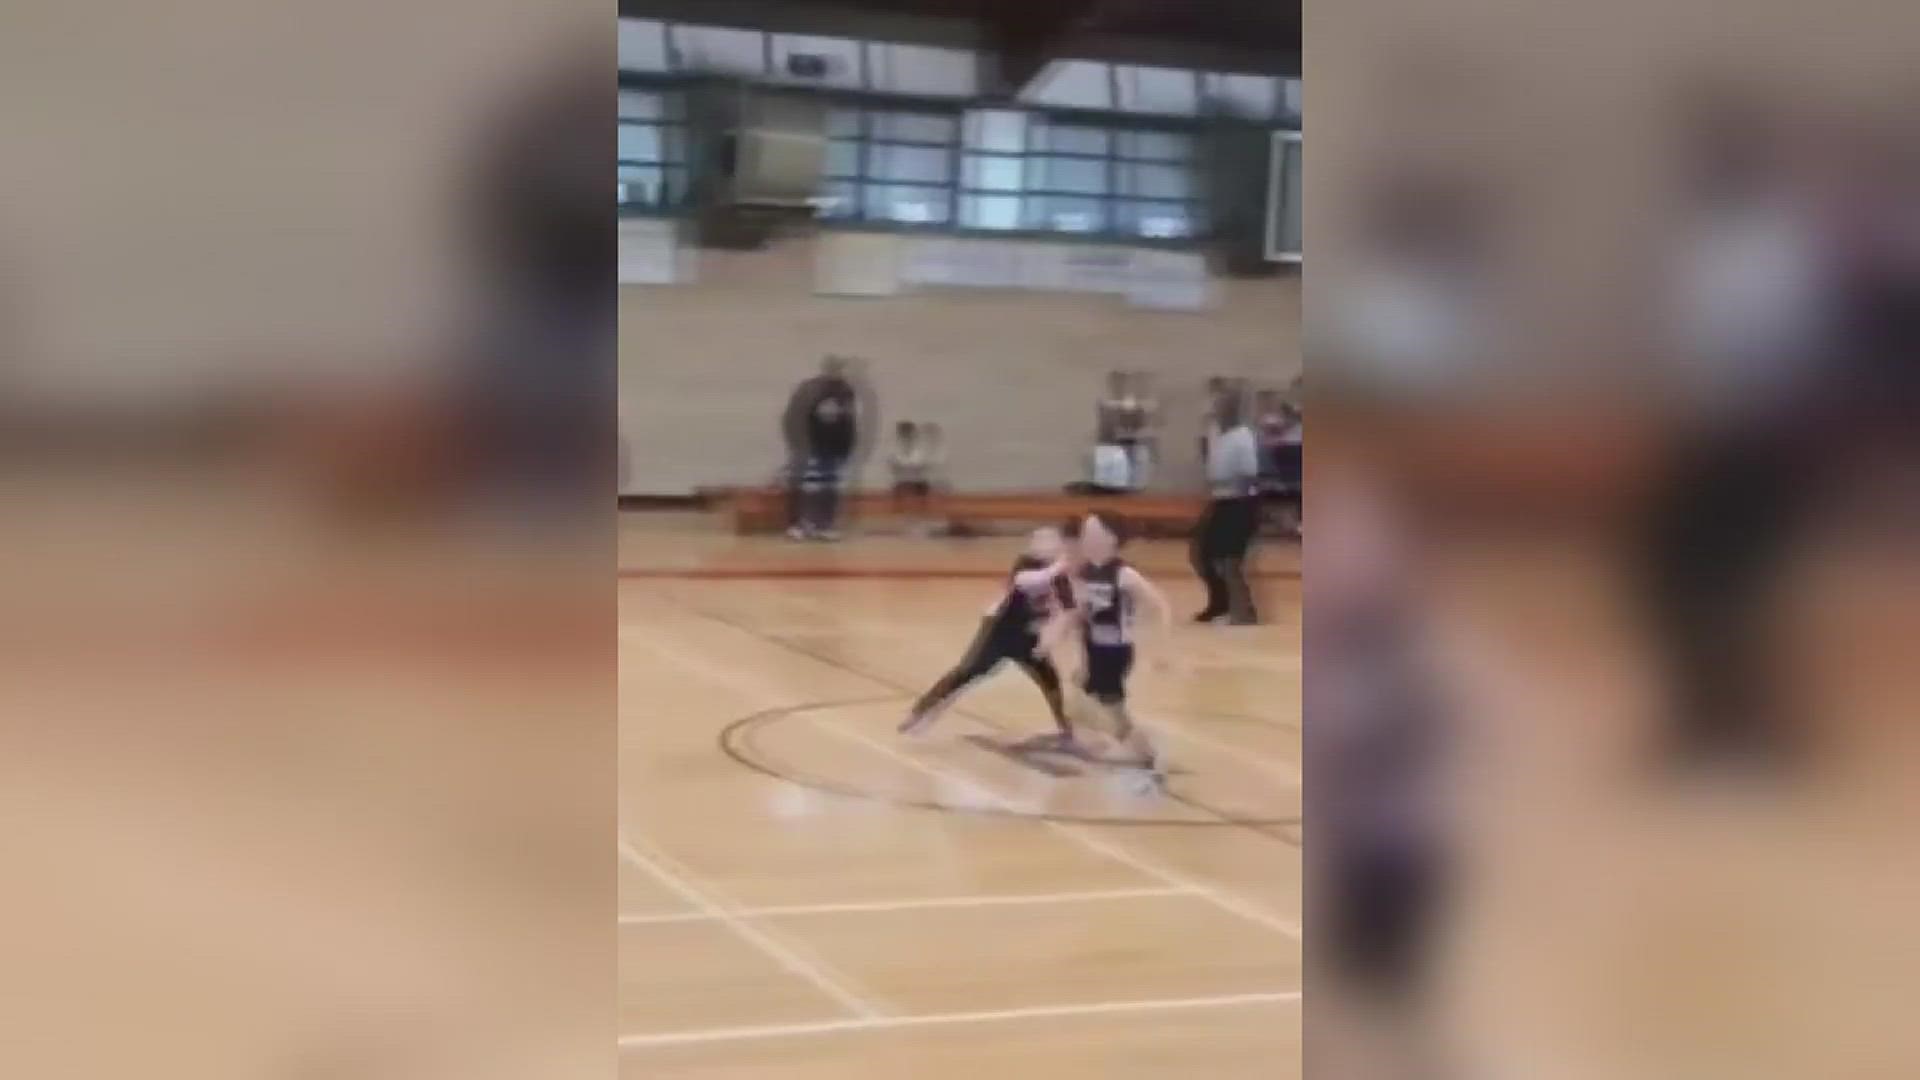 Kountze 9-year-old nails shot from half court of Little Dribblers game